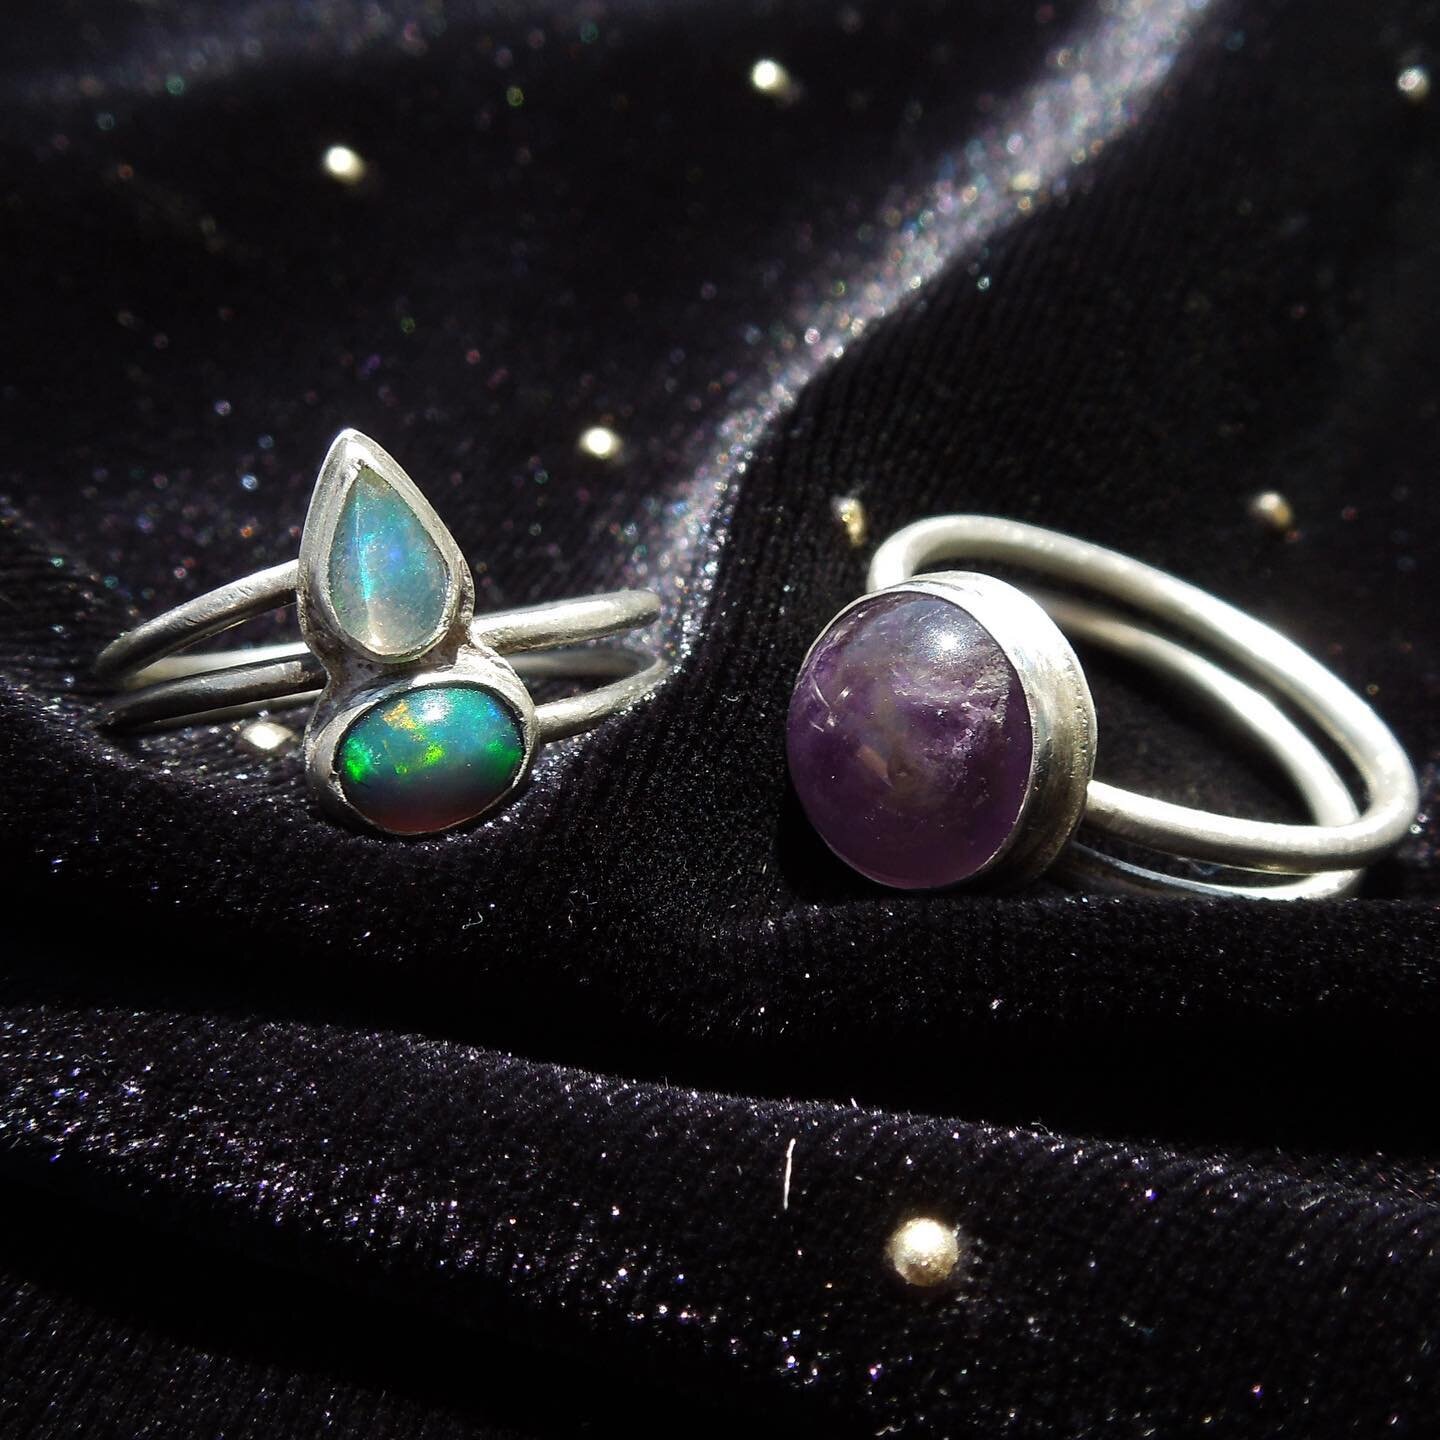 Newest Opal creation with that striking Amethyst &amp; an XL moonstone in the second slide..
phewy these opals tested my patience in the setting process but so so worth it! 
Size 6 1/2, $55

#opal #ethiopianopal #silversmithing #silverjewelry #silver